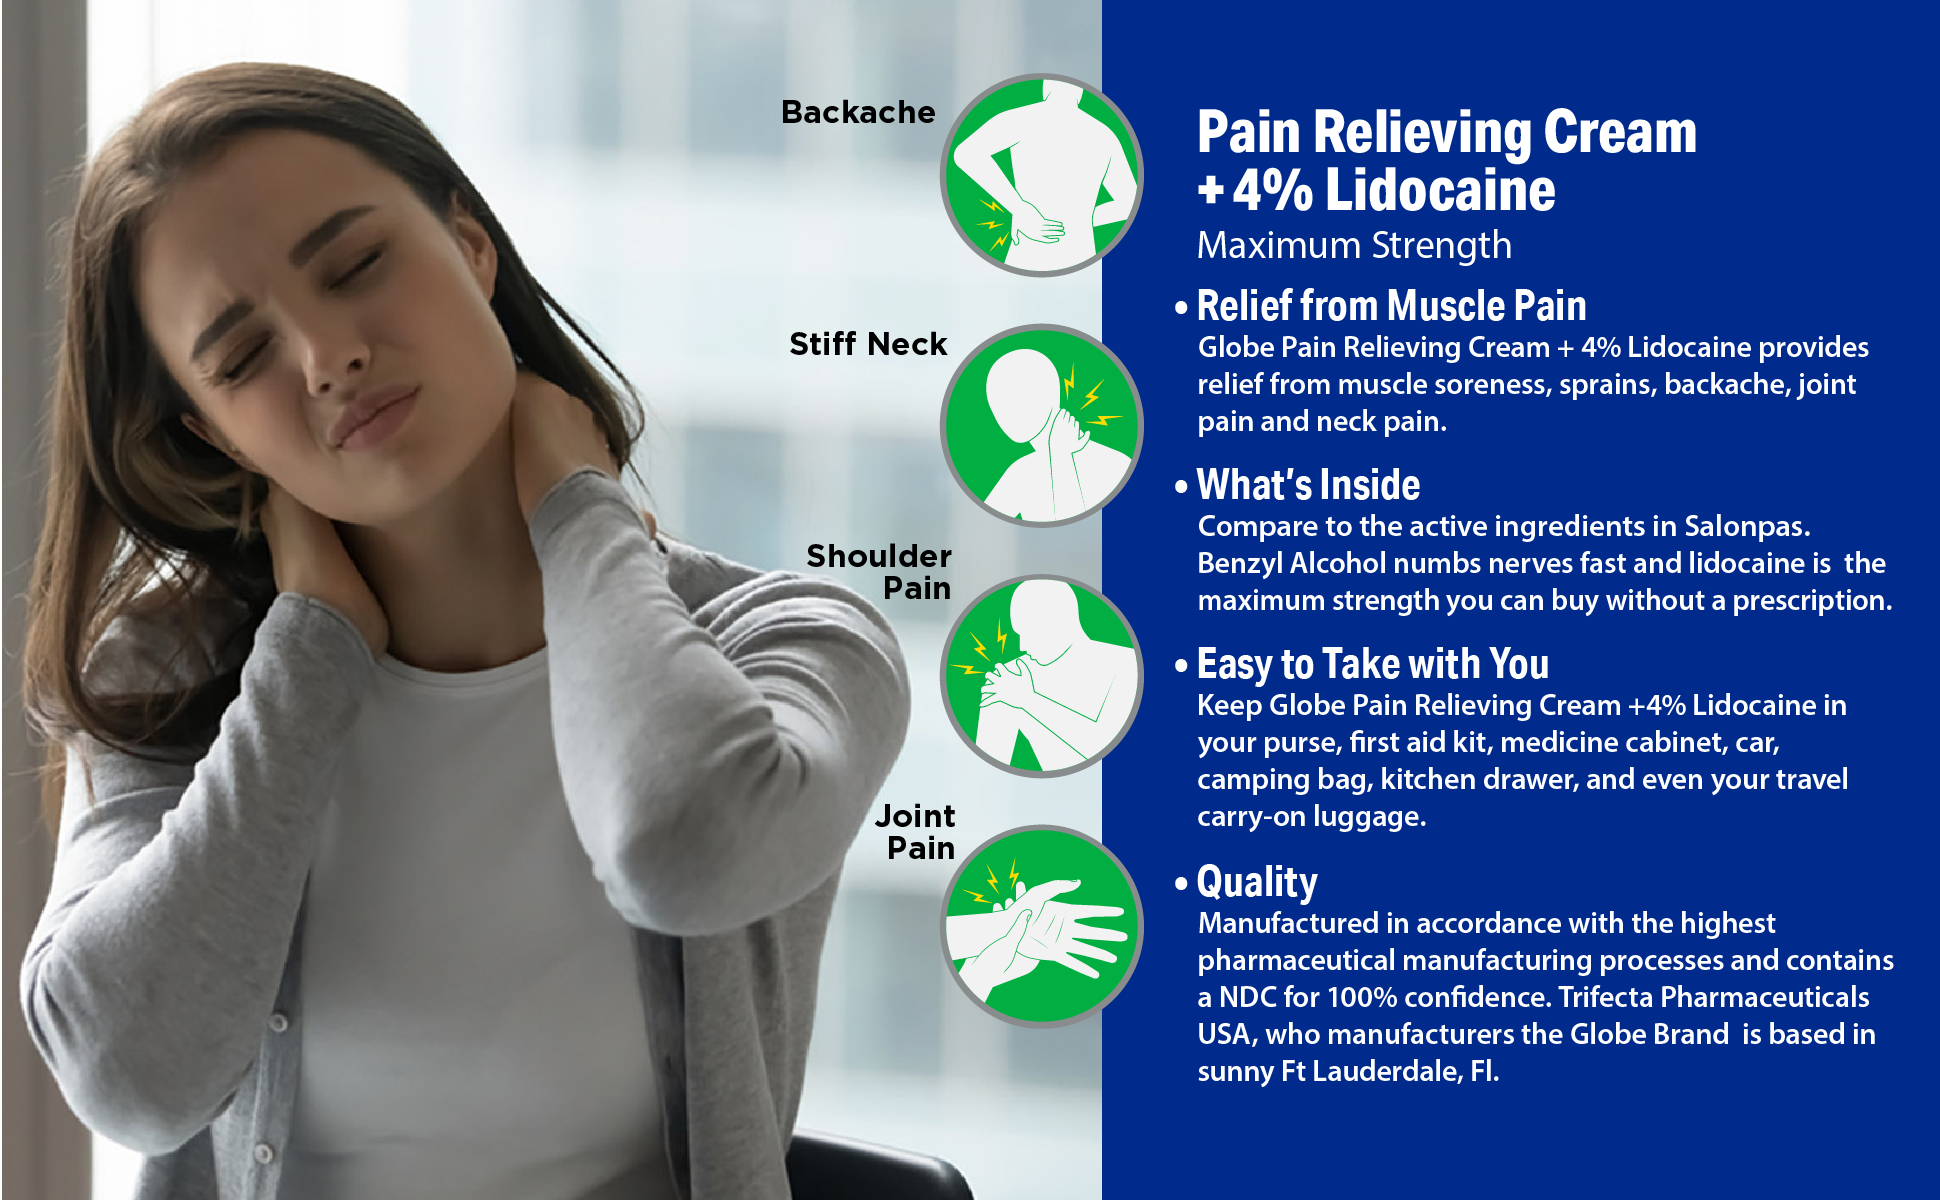 Globe Pain Relieving Cream Plus 4% Lidocaine, Fast Acting, Numbing Relief, Unscented, Compare to Salonpas Lidocaine Plus Pain Relieving Cream. (3 oz)